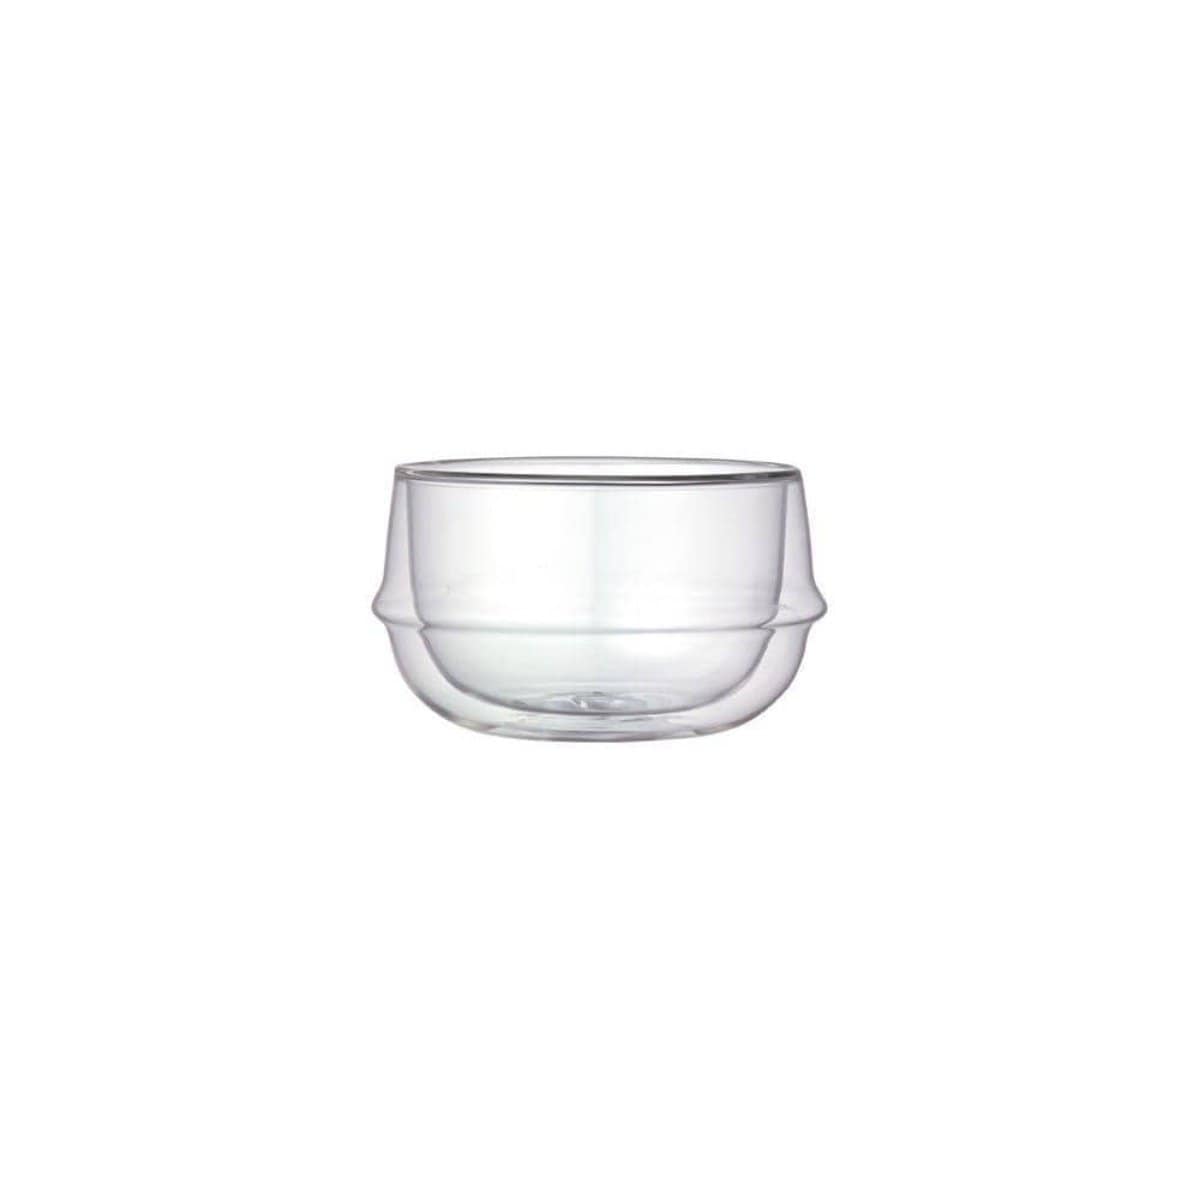 A Kinto Double-Walled Teacup with a double-wall design. The teacup is round with a slight indentation around the middle, giving it a unique, modern appearance. Perfect for showcasing organic tea or loose leaf tea, its transparency highlights the double thickness of the glass walls against a plain white background.